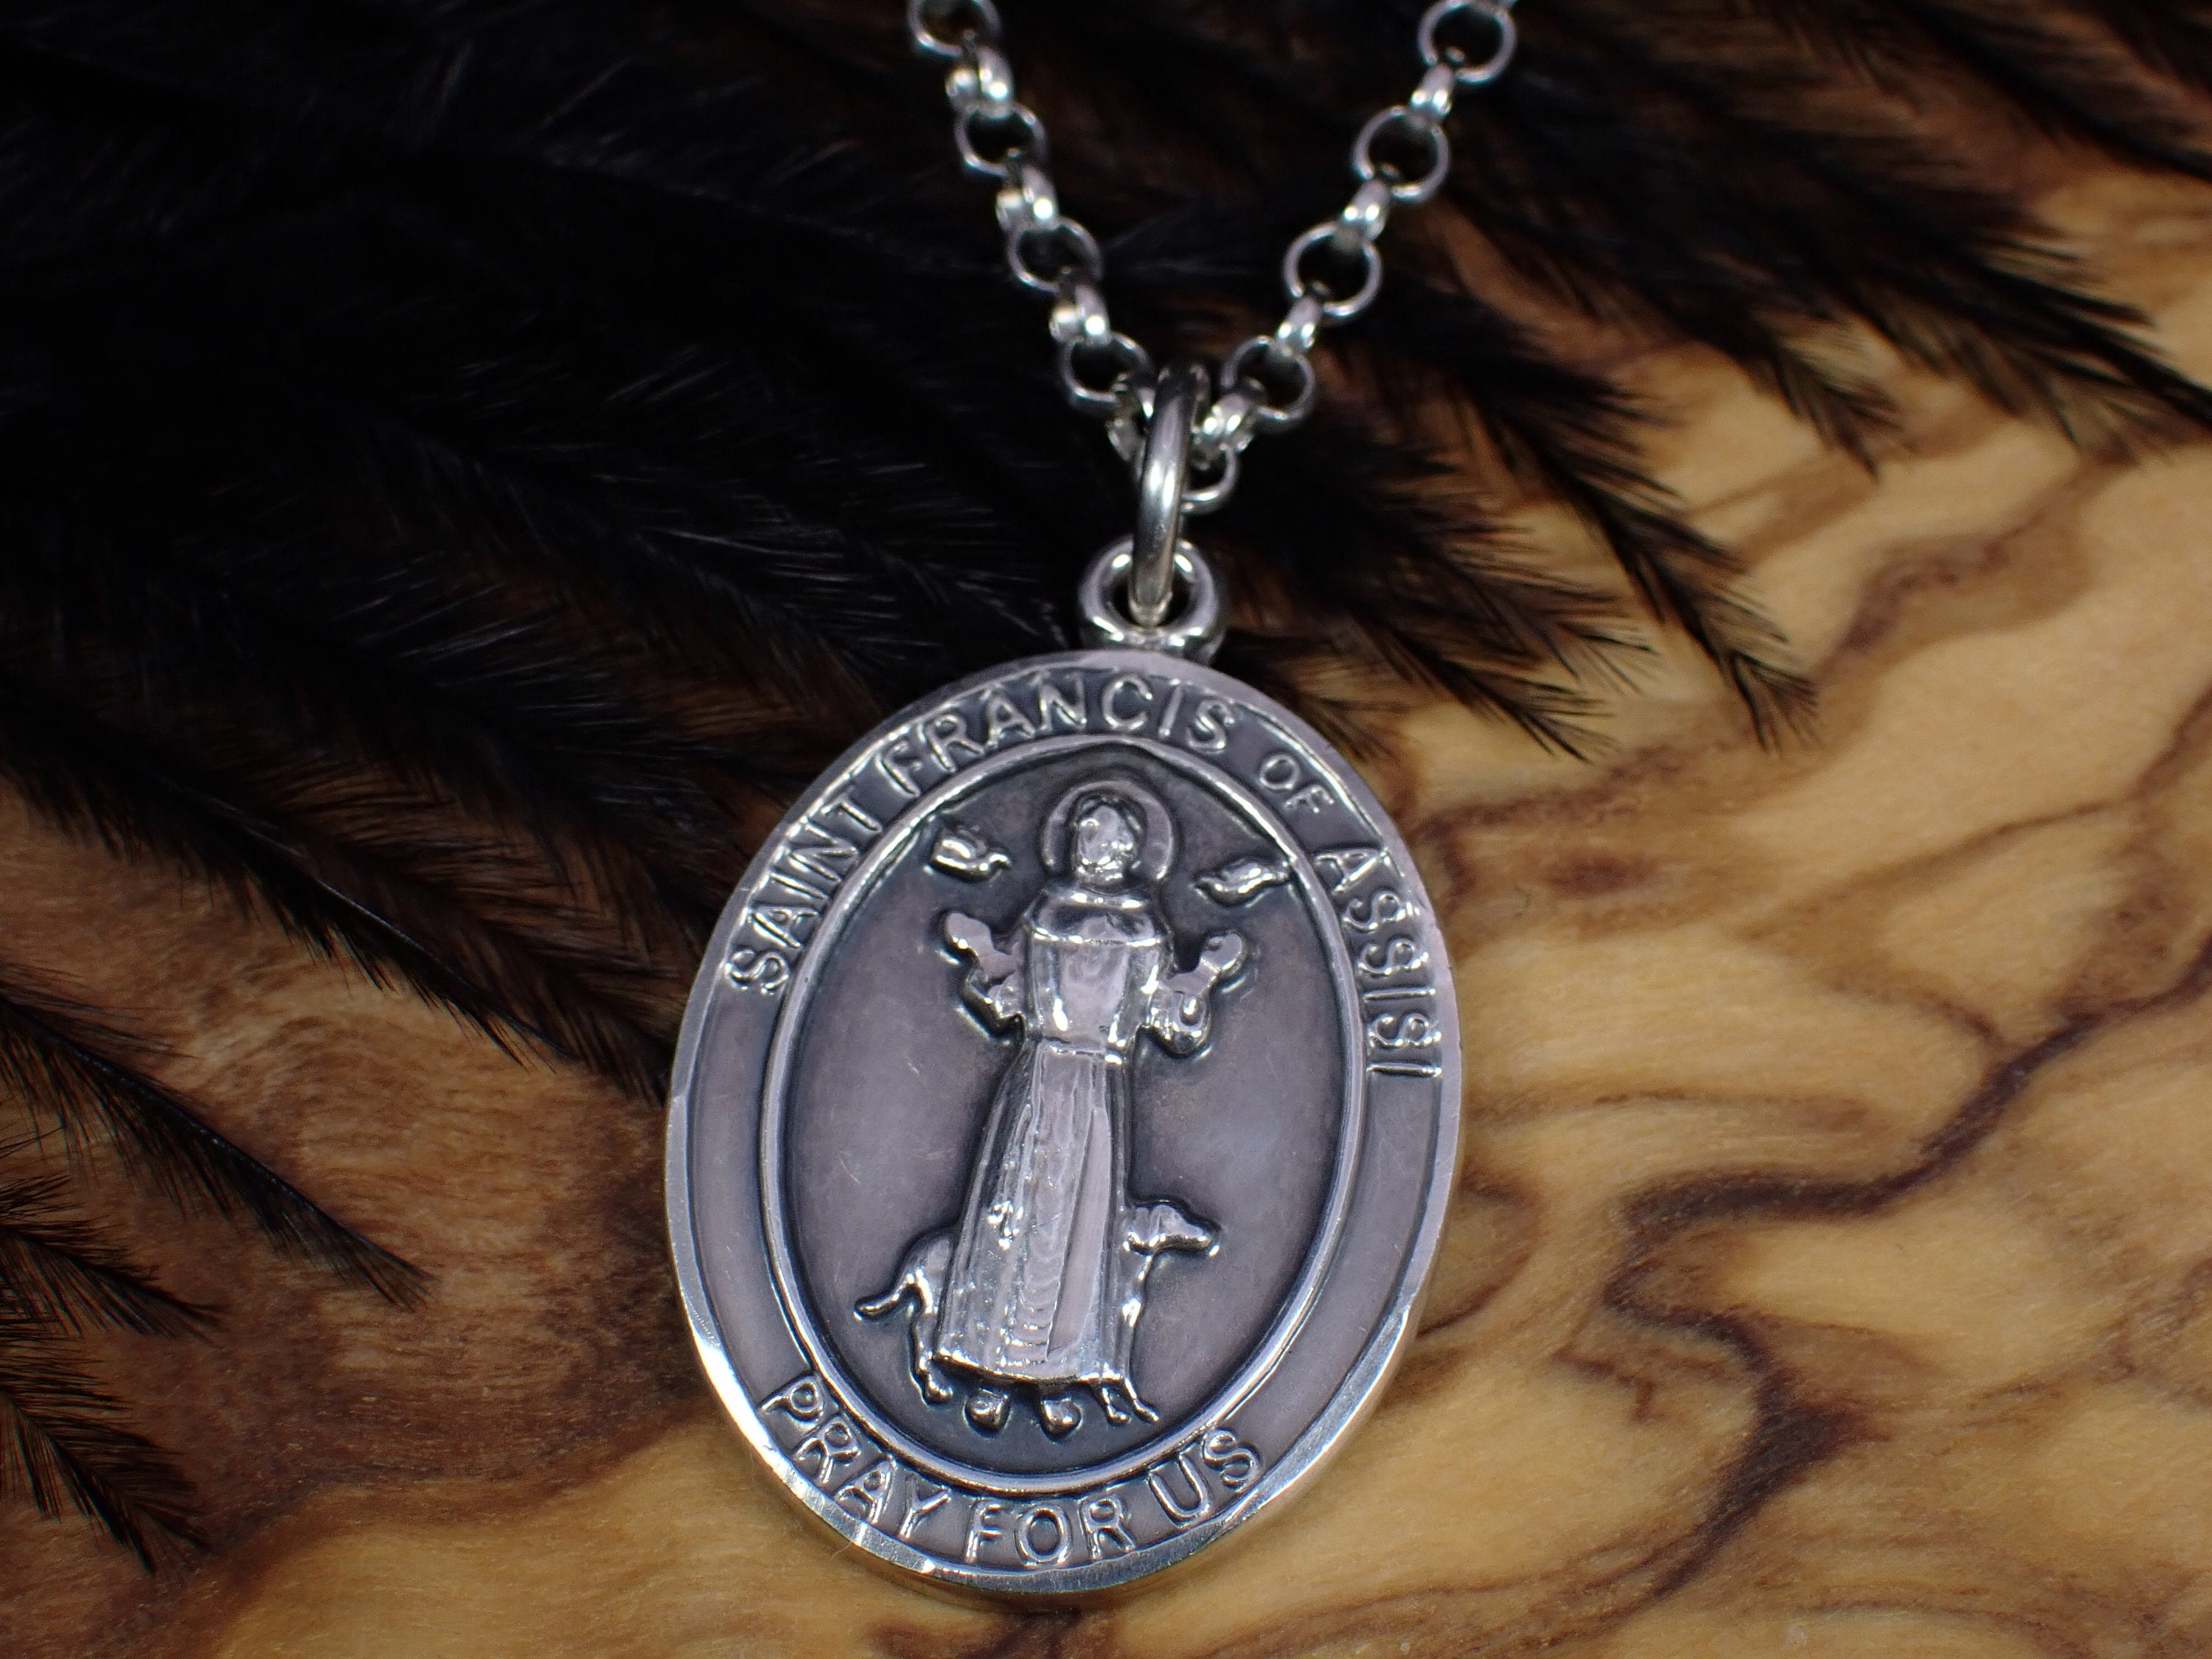 St. Francis of Assisi, Pray For Us, Oval Necklace - Christianbook.com